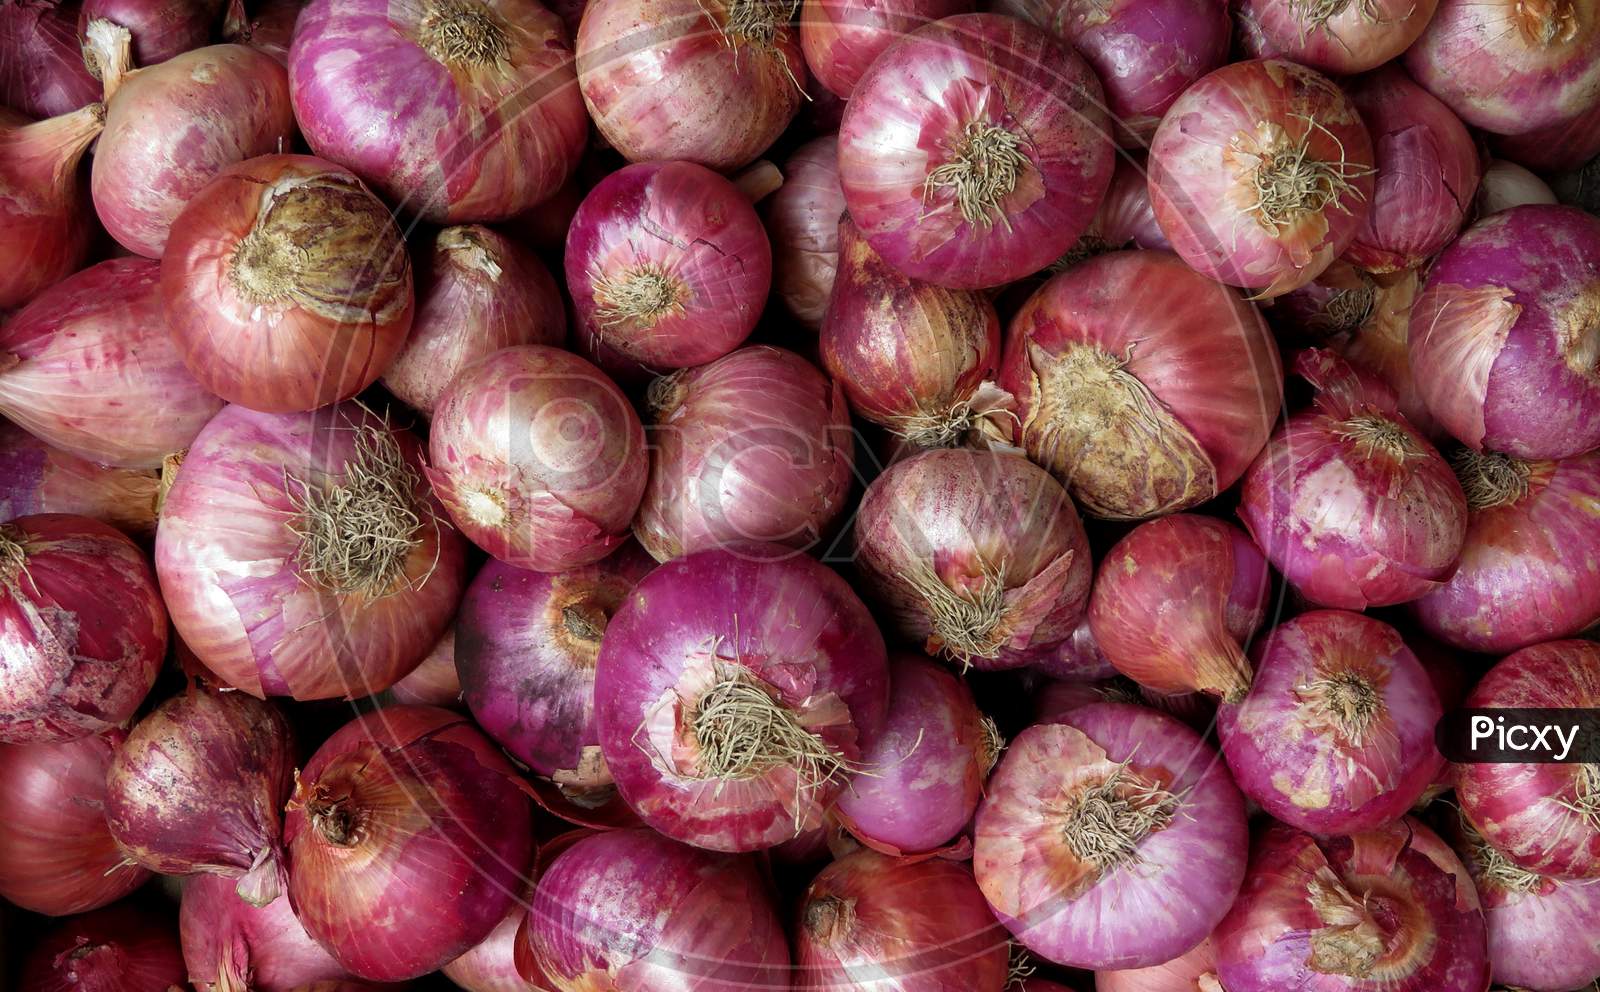 Isolated Red Onions,Red onions in market,onions at market ,Red onions on market stall,Closeup of Onions.Group Of Onions.